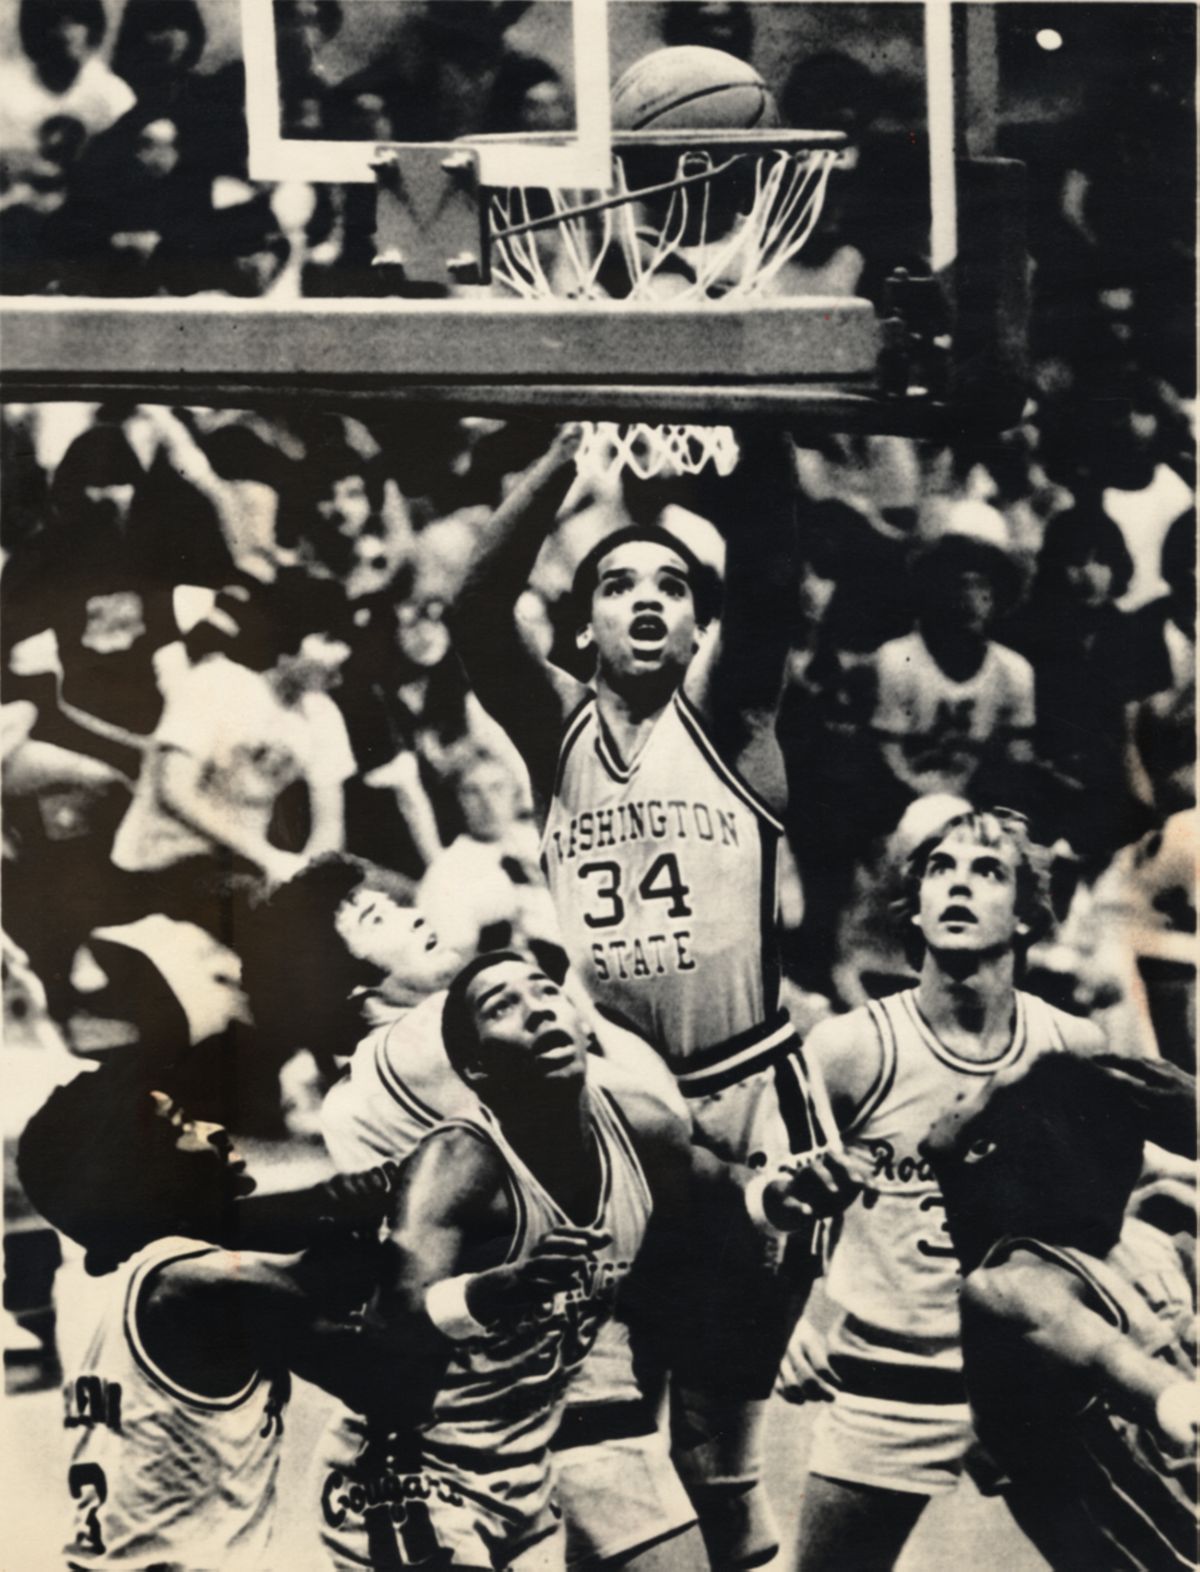 Then: Aaron Haskins (34) played a key role on Washington State’s 1982-83 NCAA tournament team. (File Associated Press / The Spokesman-Review)